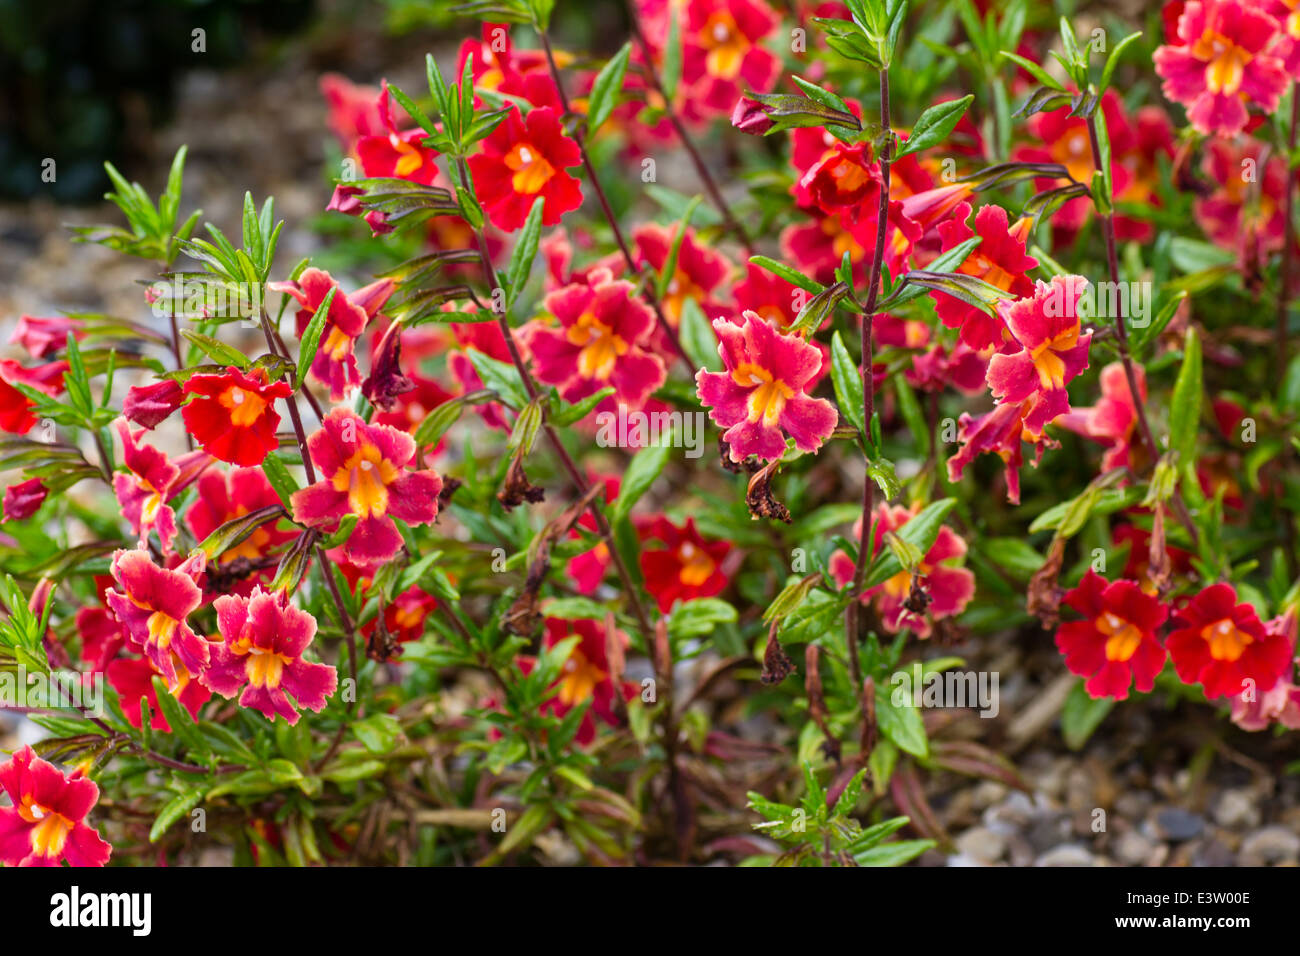 Flowers and foliage of the red monkey flower, Diplacus puniceus Stock Photo